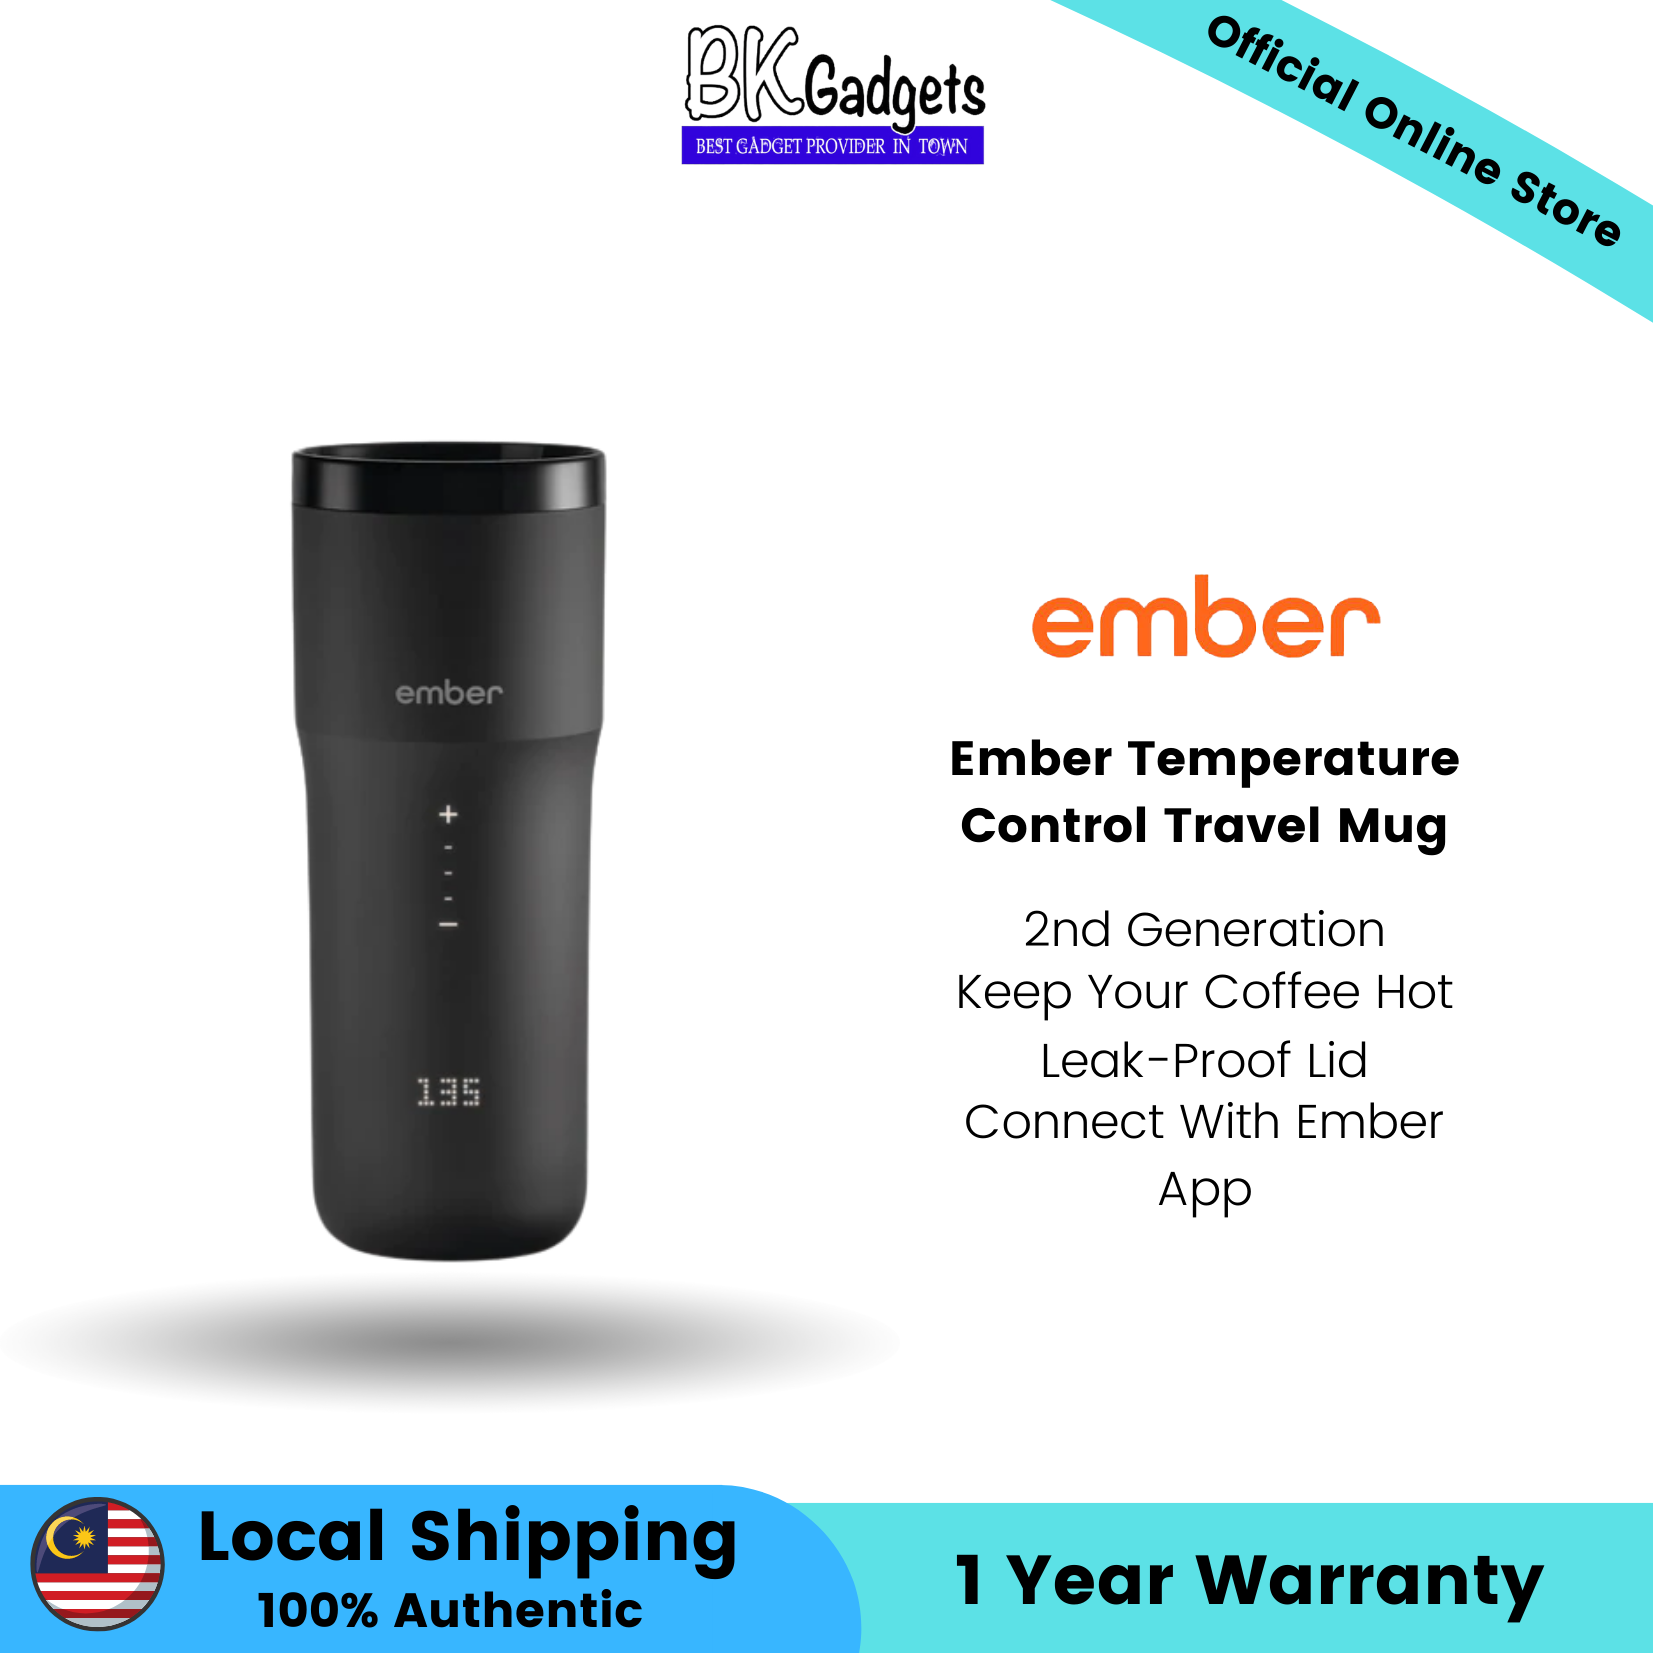 Ember Temperature Control Travel Mug - 2nd Generation | Leak-Proof Lid | Connect With Ember App